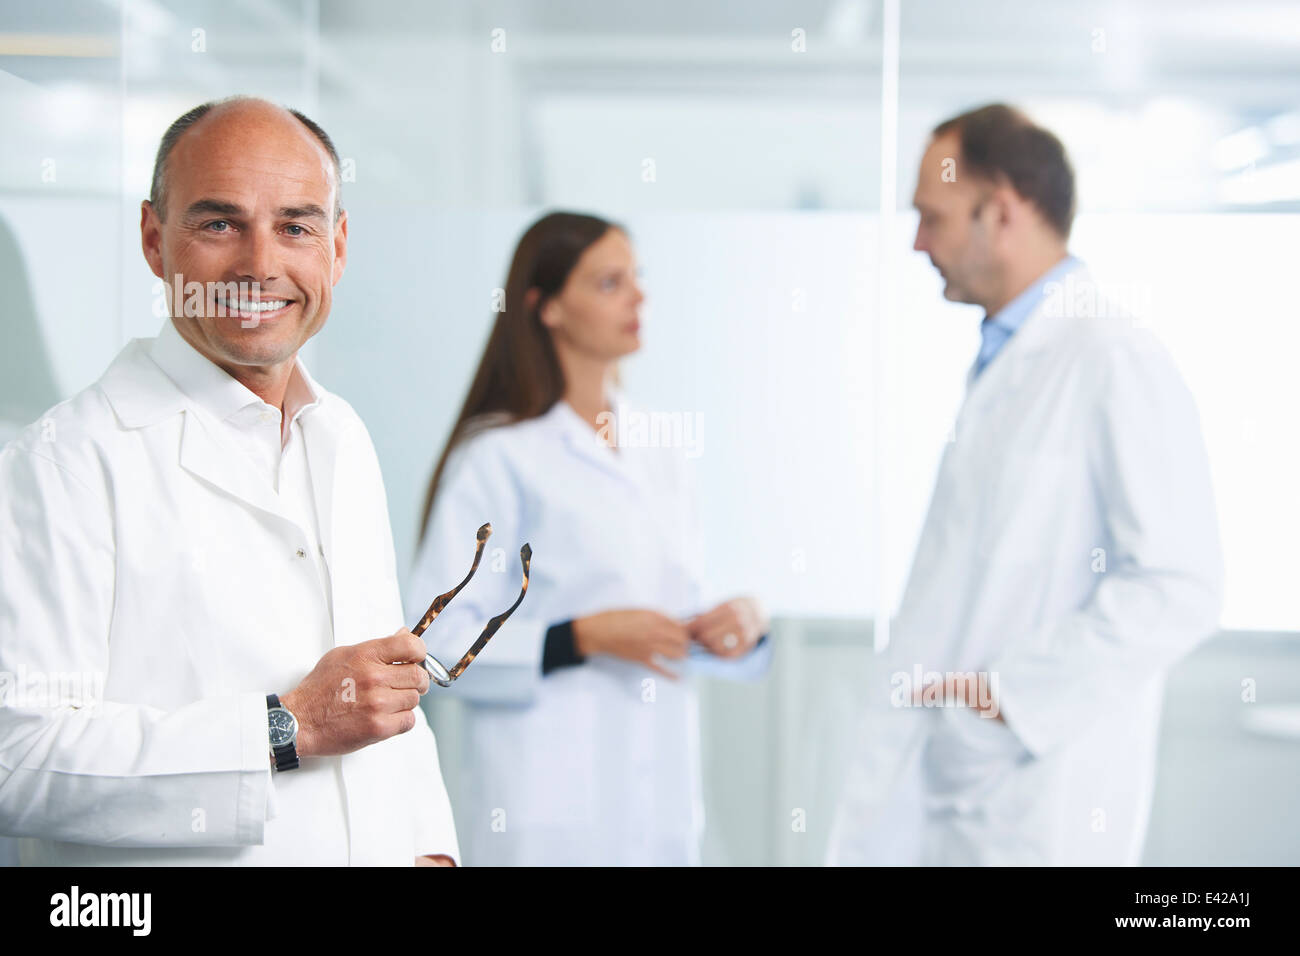 Male doctor by reflective wall, colleagues in background Stock Photo